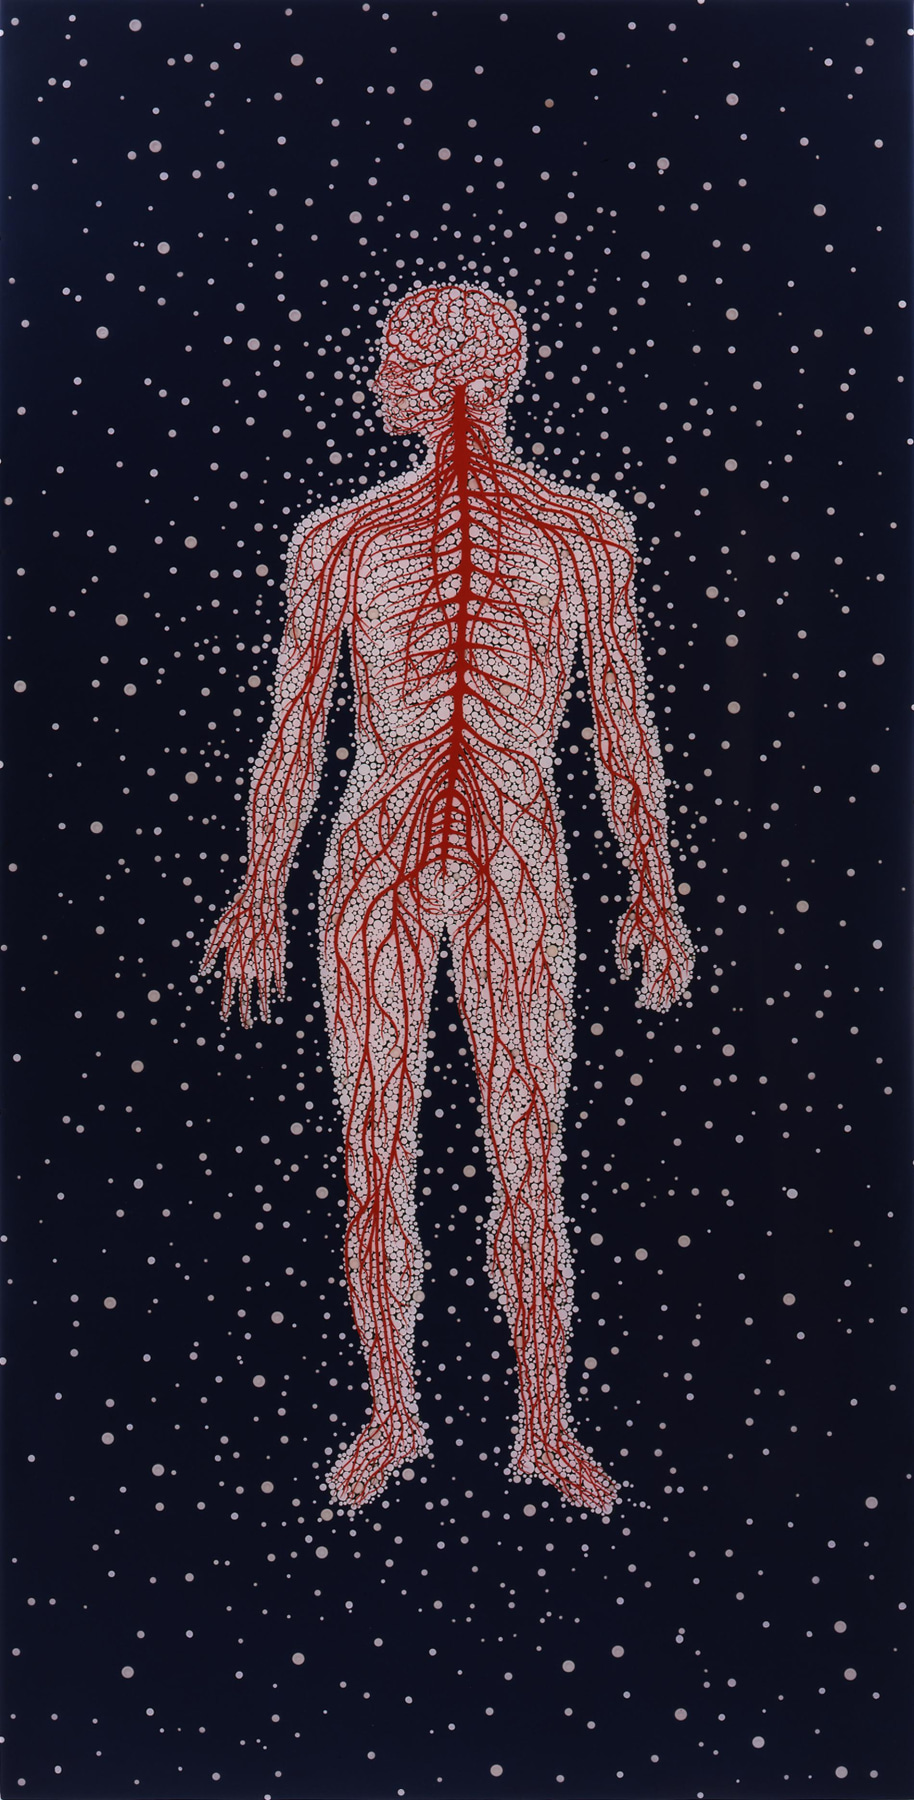 Image of FRED TOMASELLI's Naked From the Inside, 1992-2009